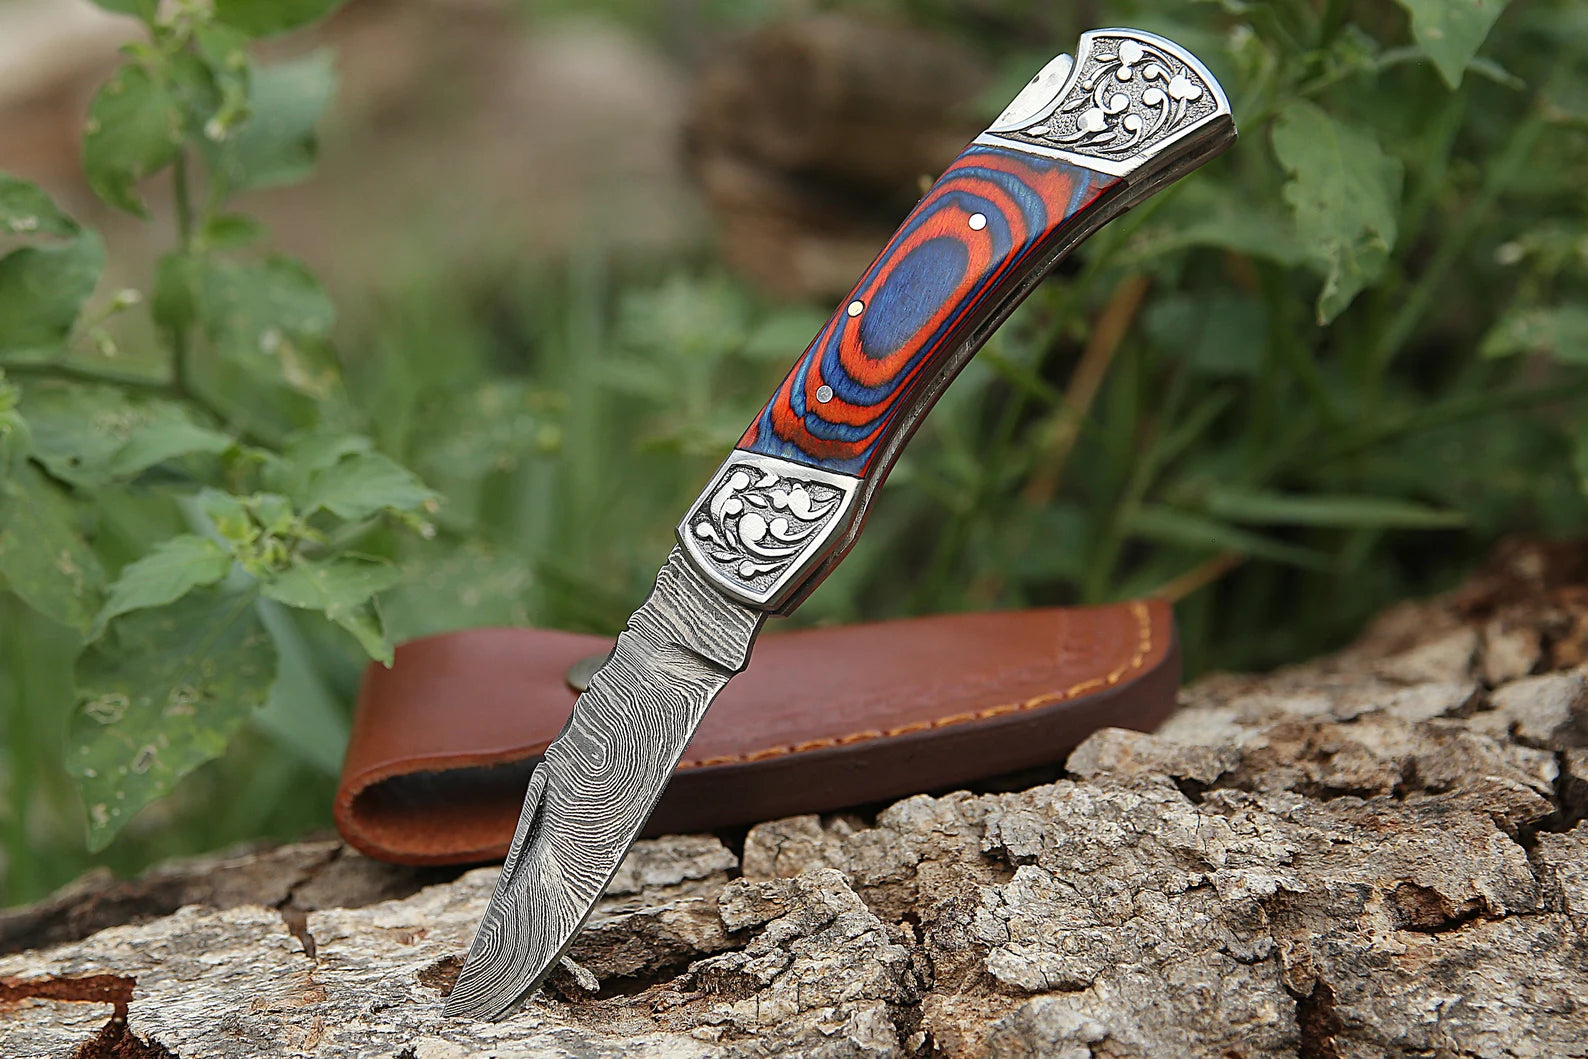 Damascus Steel Folding Pocket Knife – Multi Blue and Red